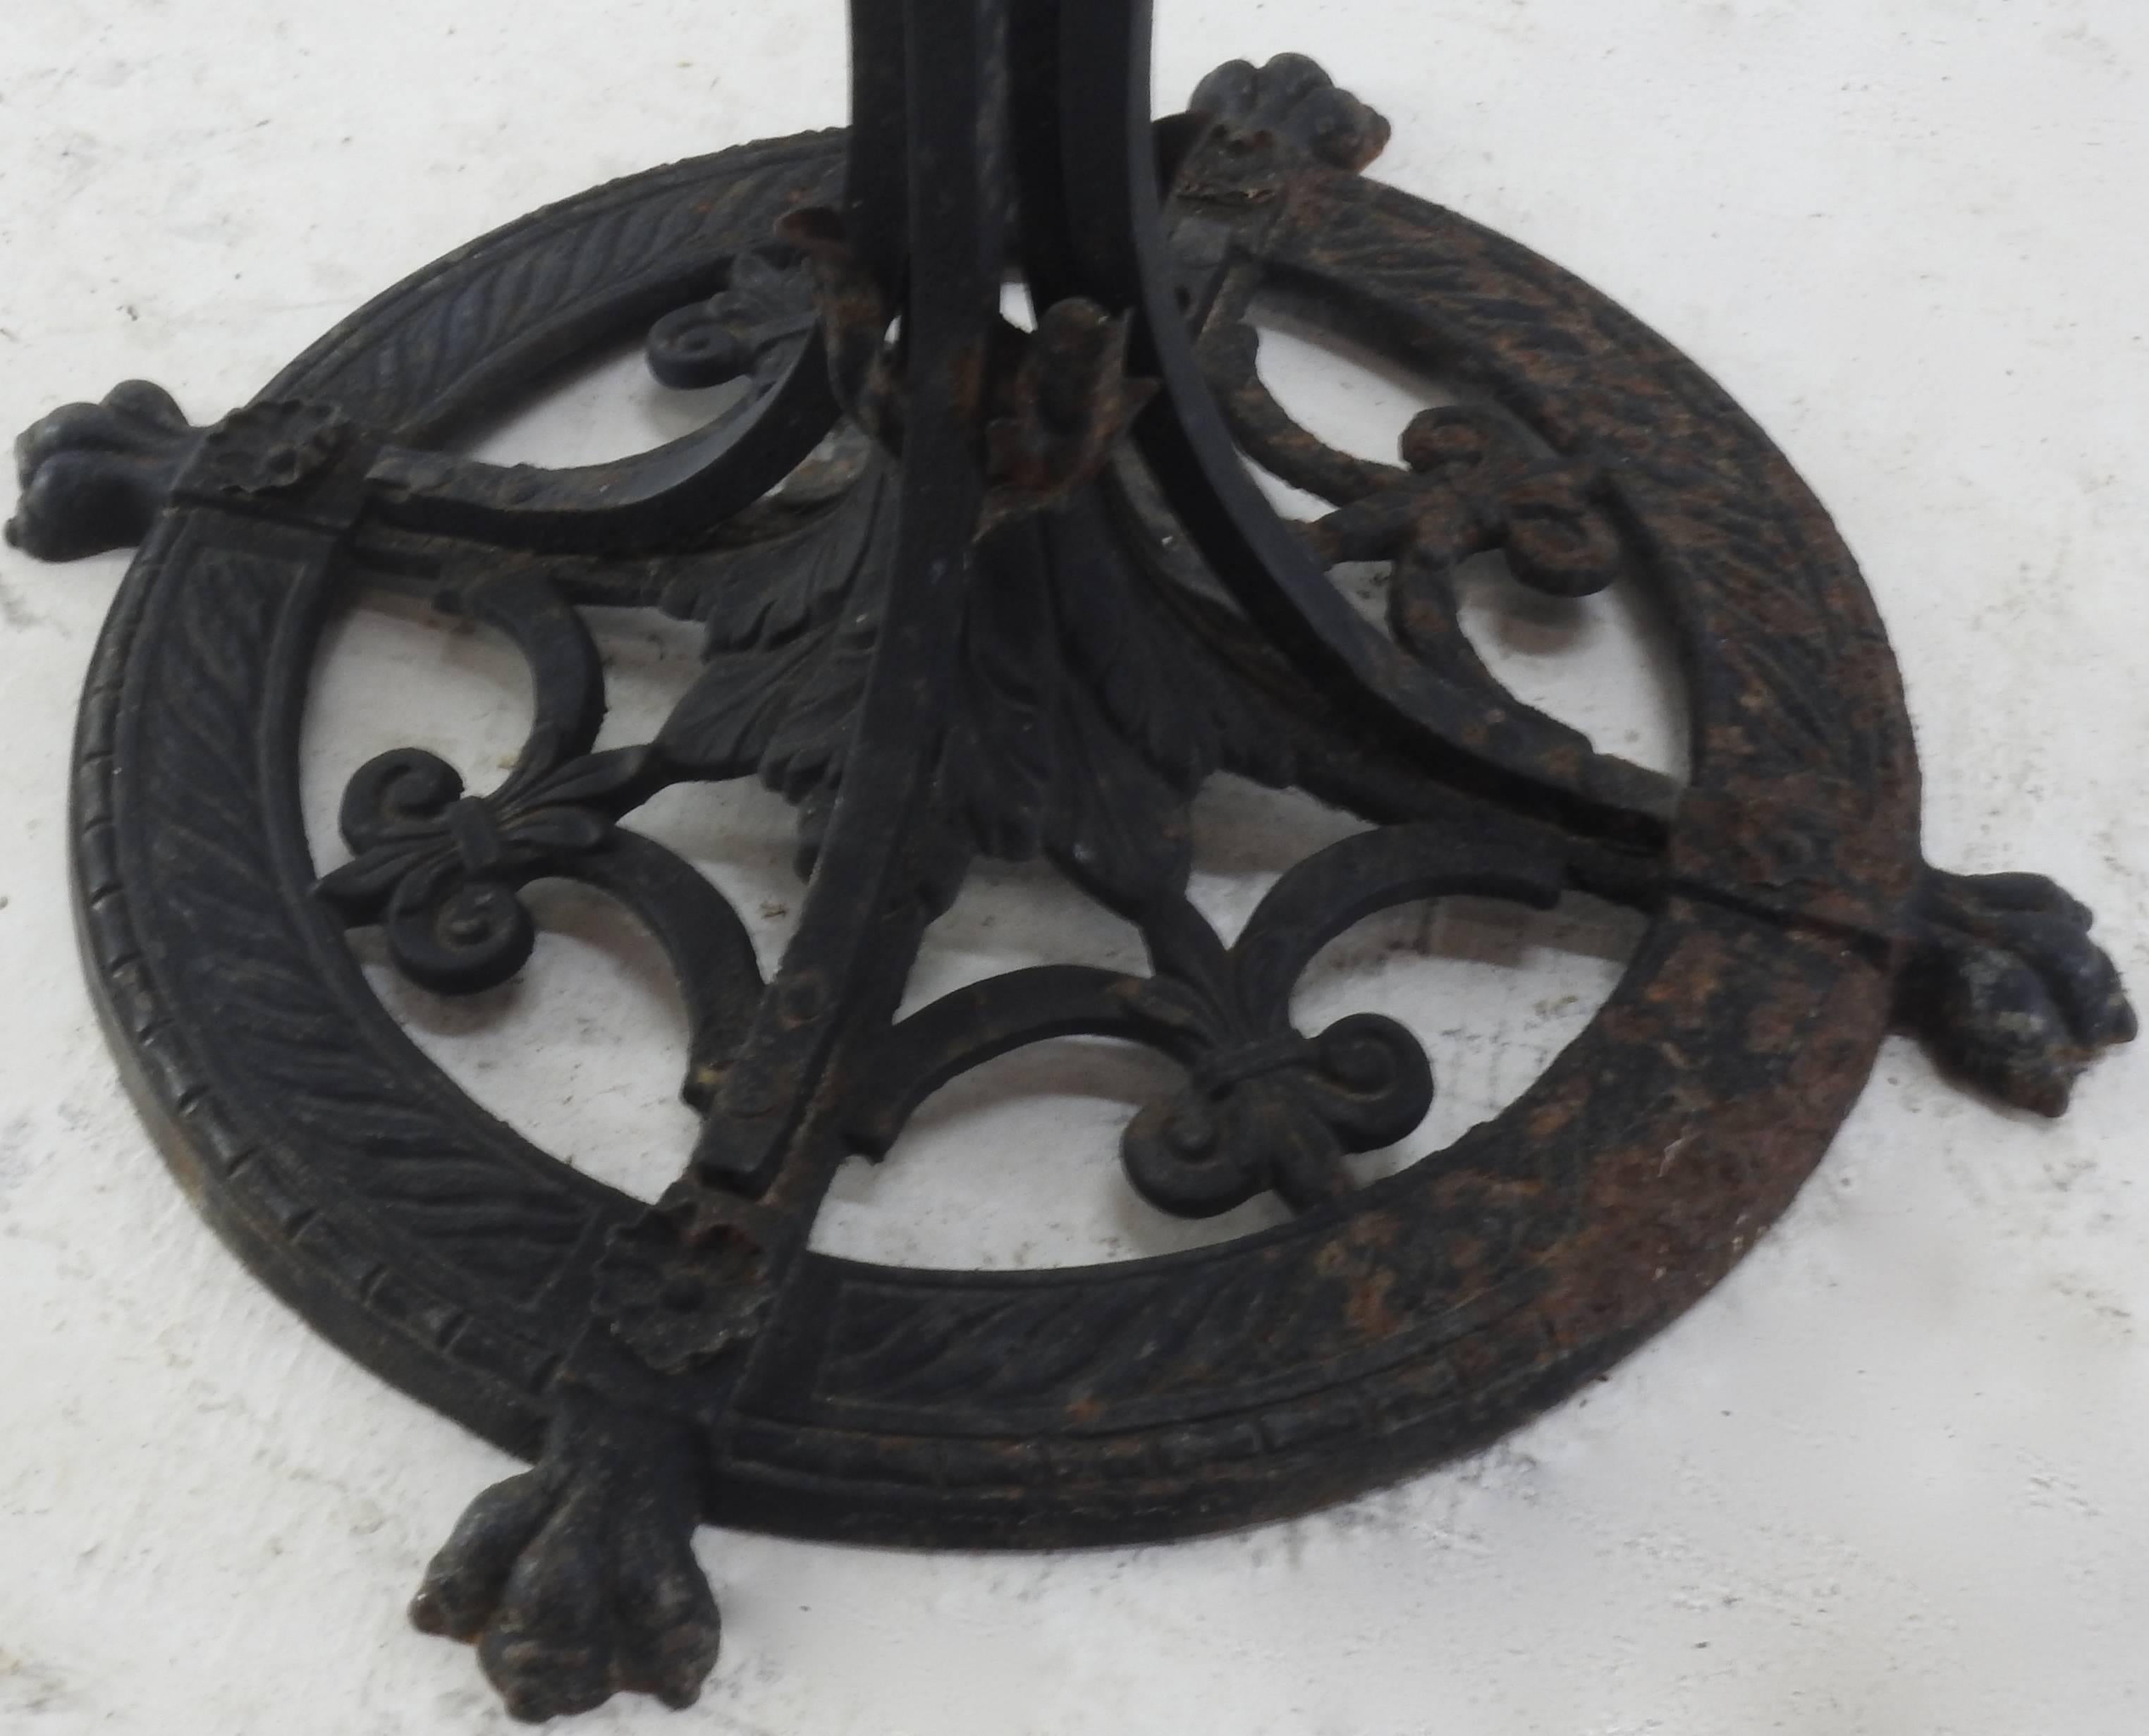 Classic Fleur de Lis pattern is on the base of this hand forged wrought iron plant stand. The center column is made up of four twisted bars that angle near the top to support your planter. It is accented with rings at the top of each bar.